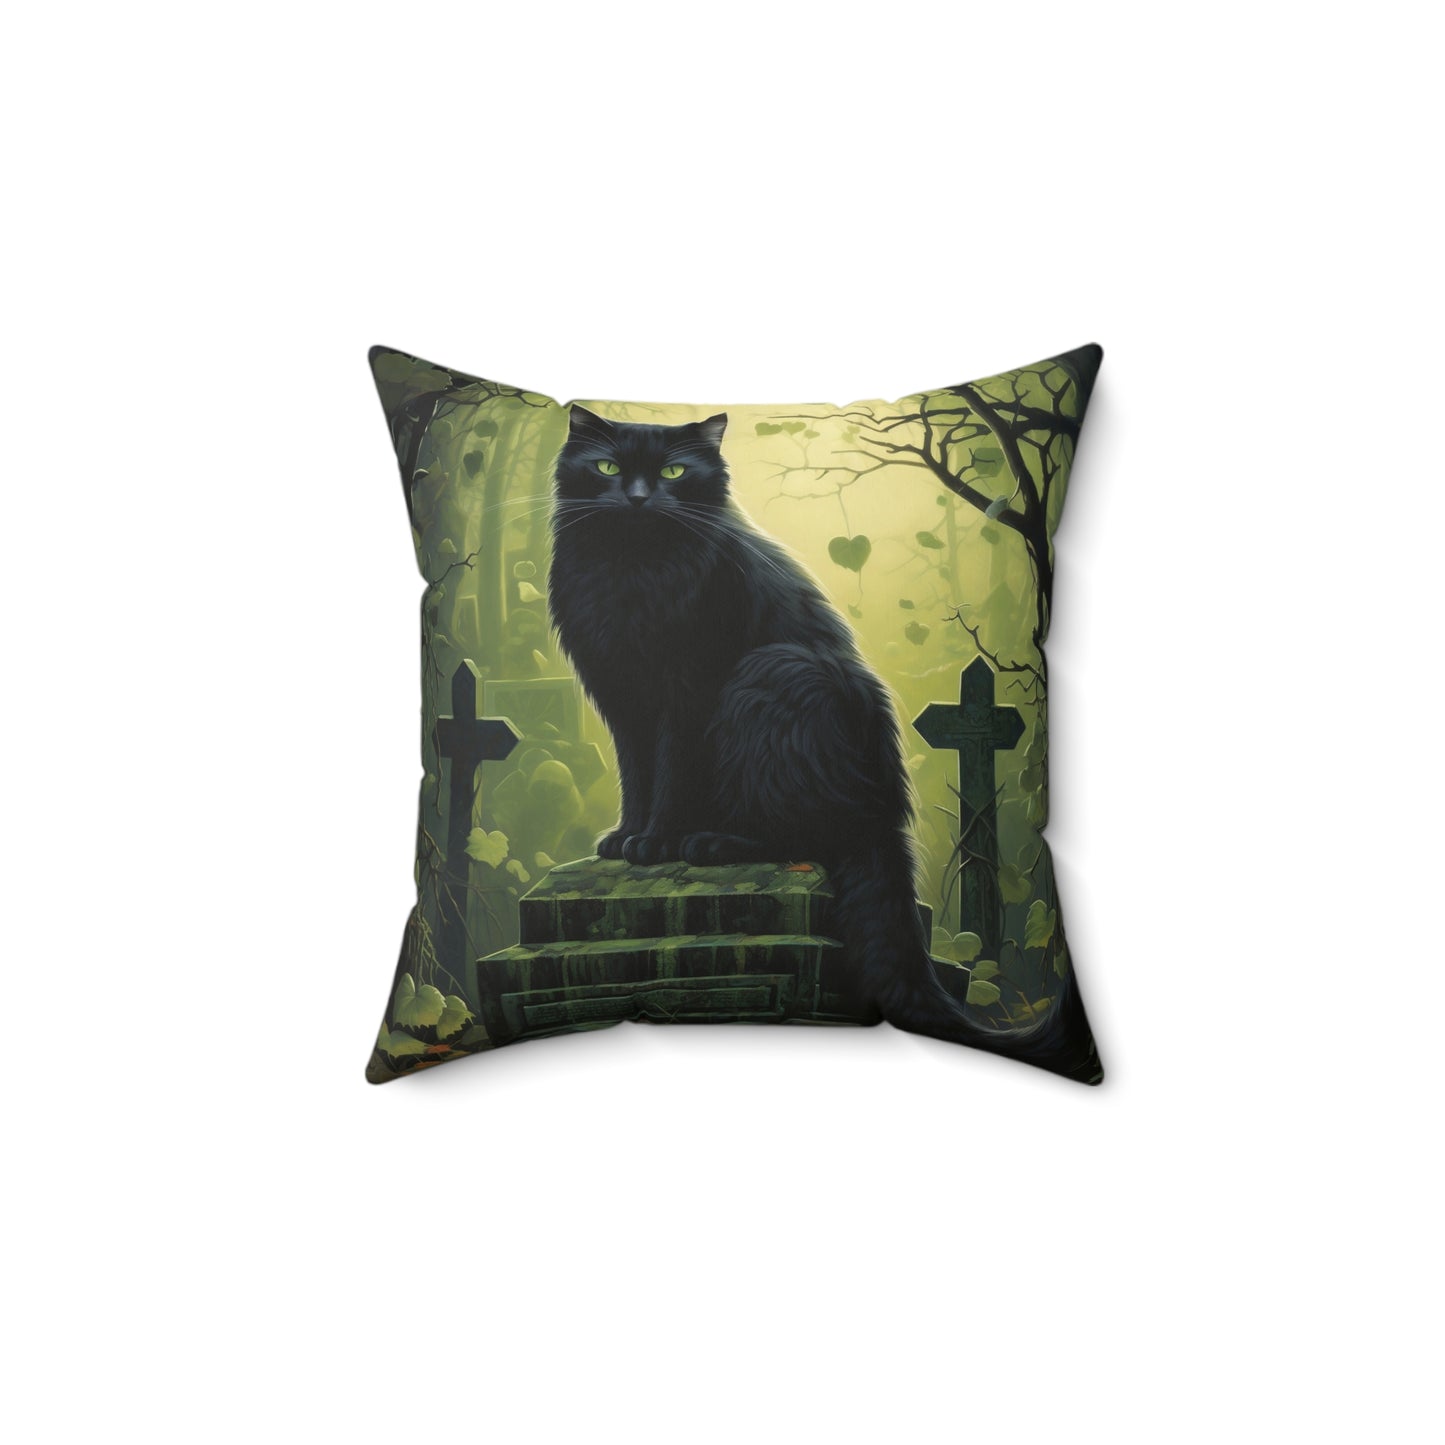 Cat Lover Square Pillow with Cover Halloween Spooky Moonlit Black Cat